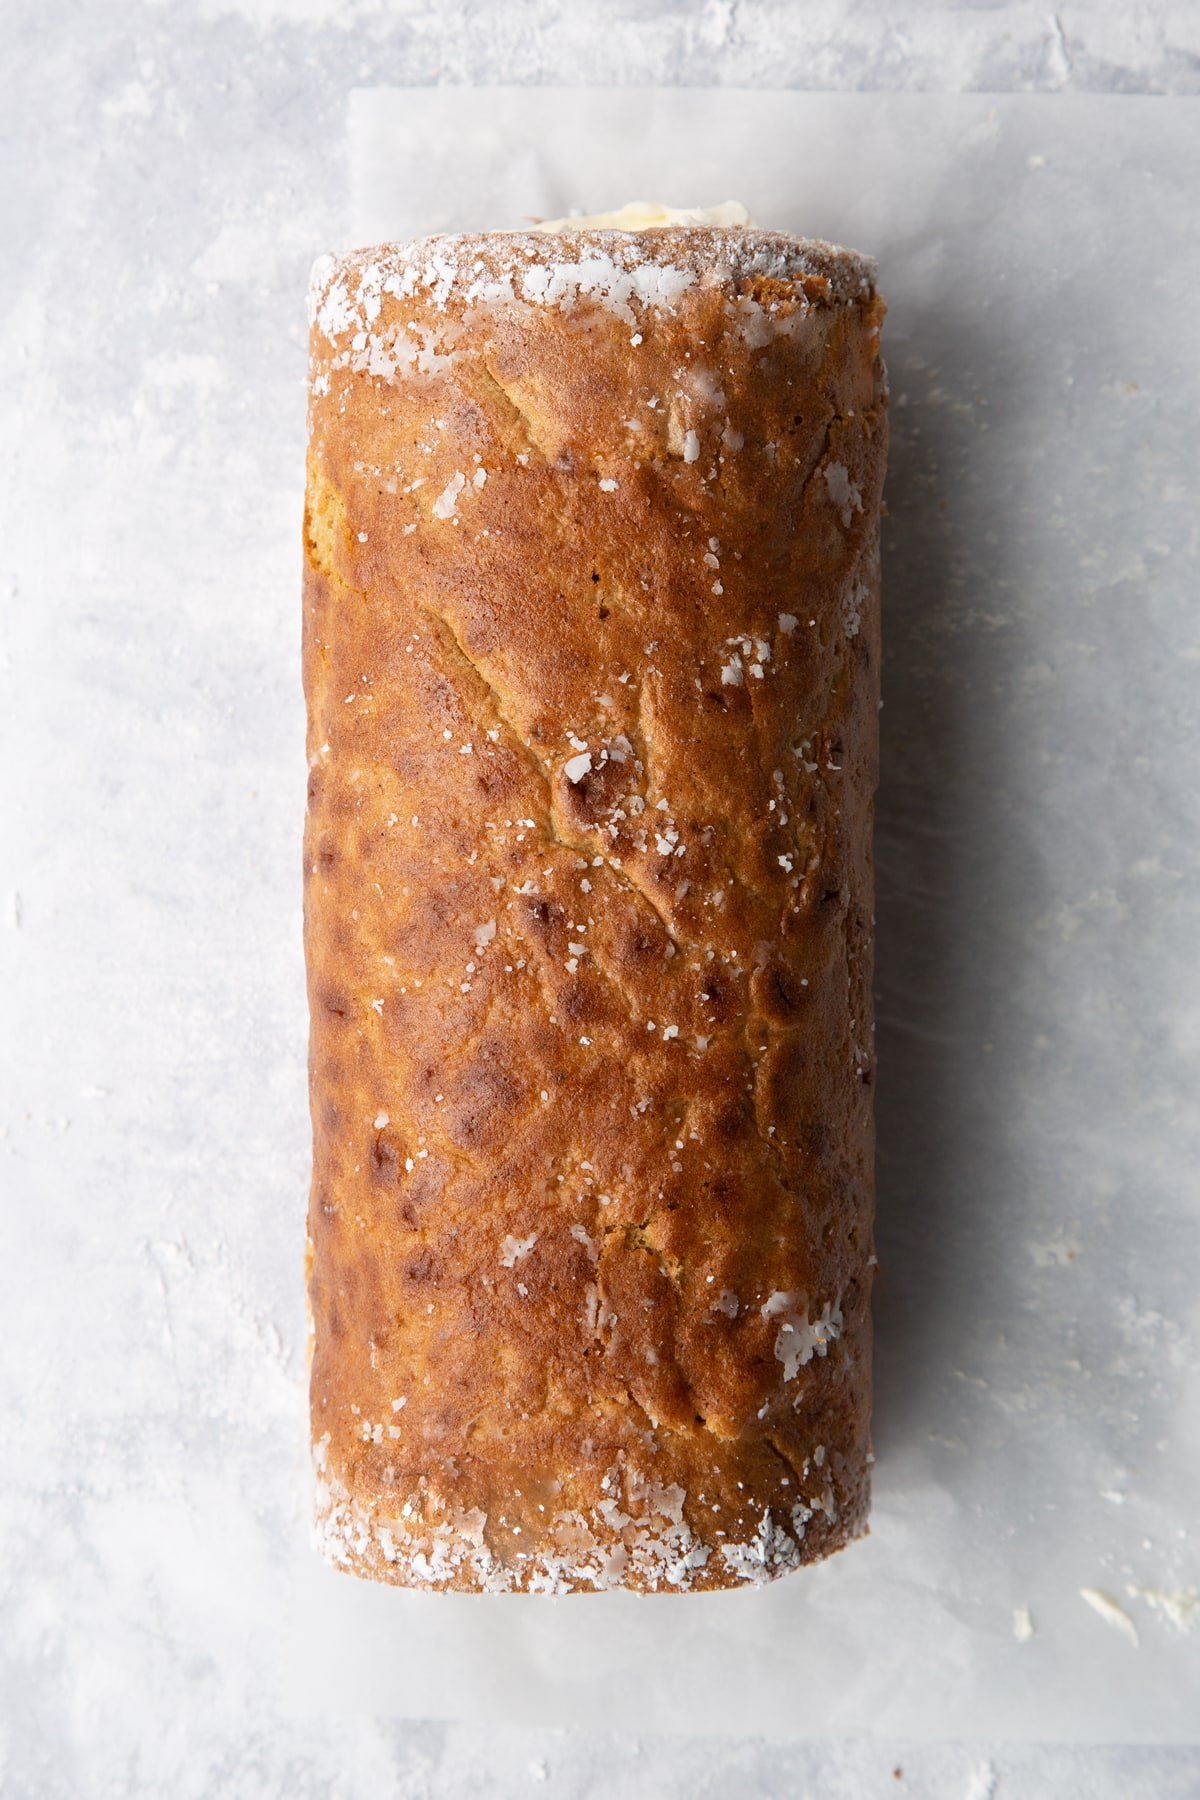 Gingerbread Swiss roll on an icing sugar dusted surface.